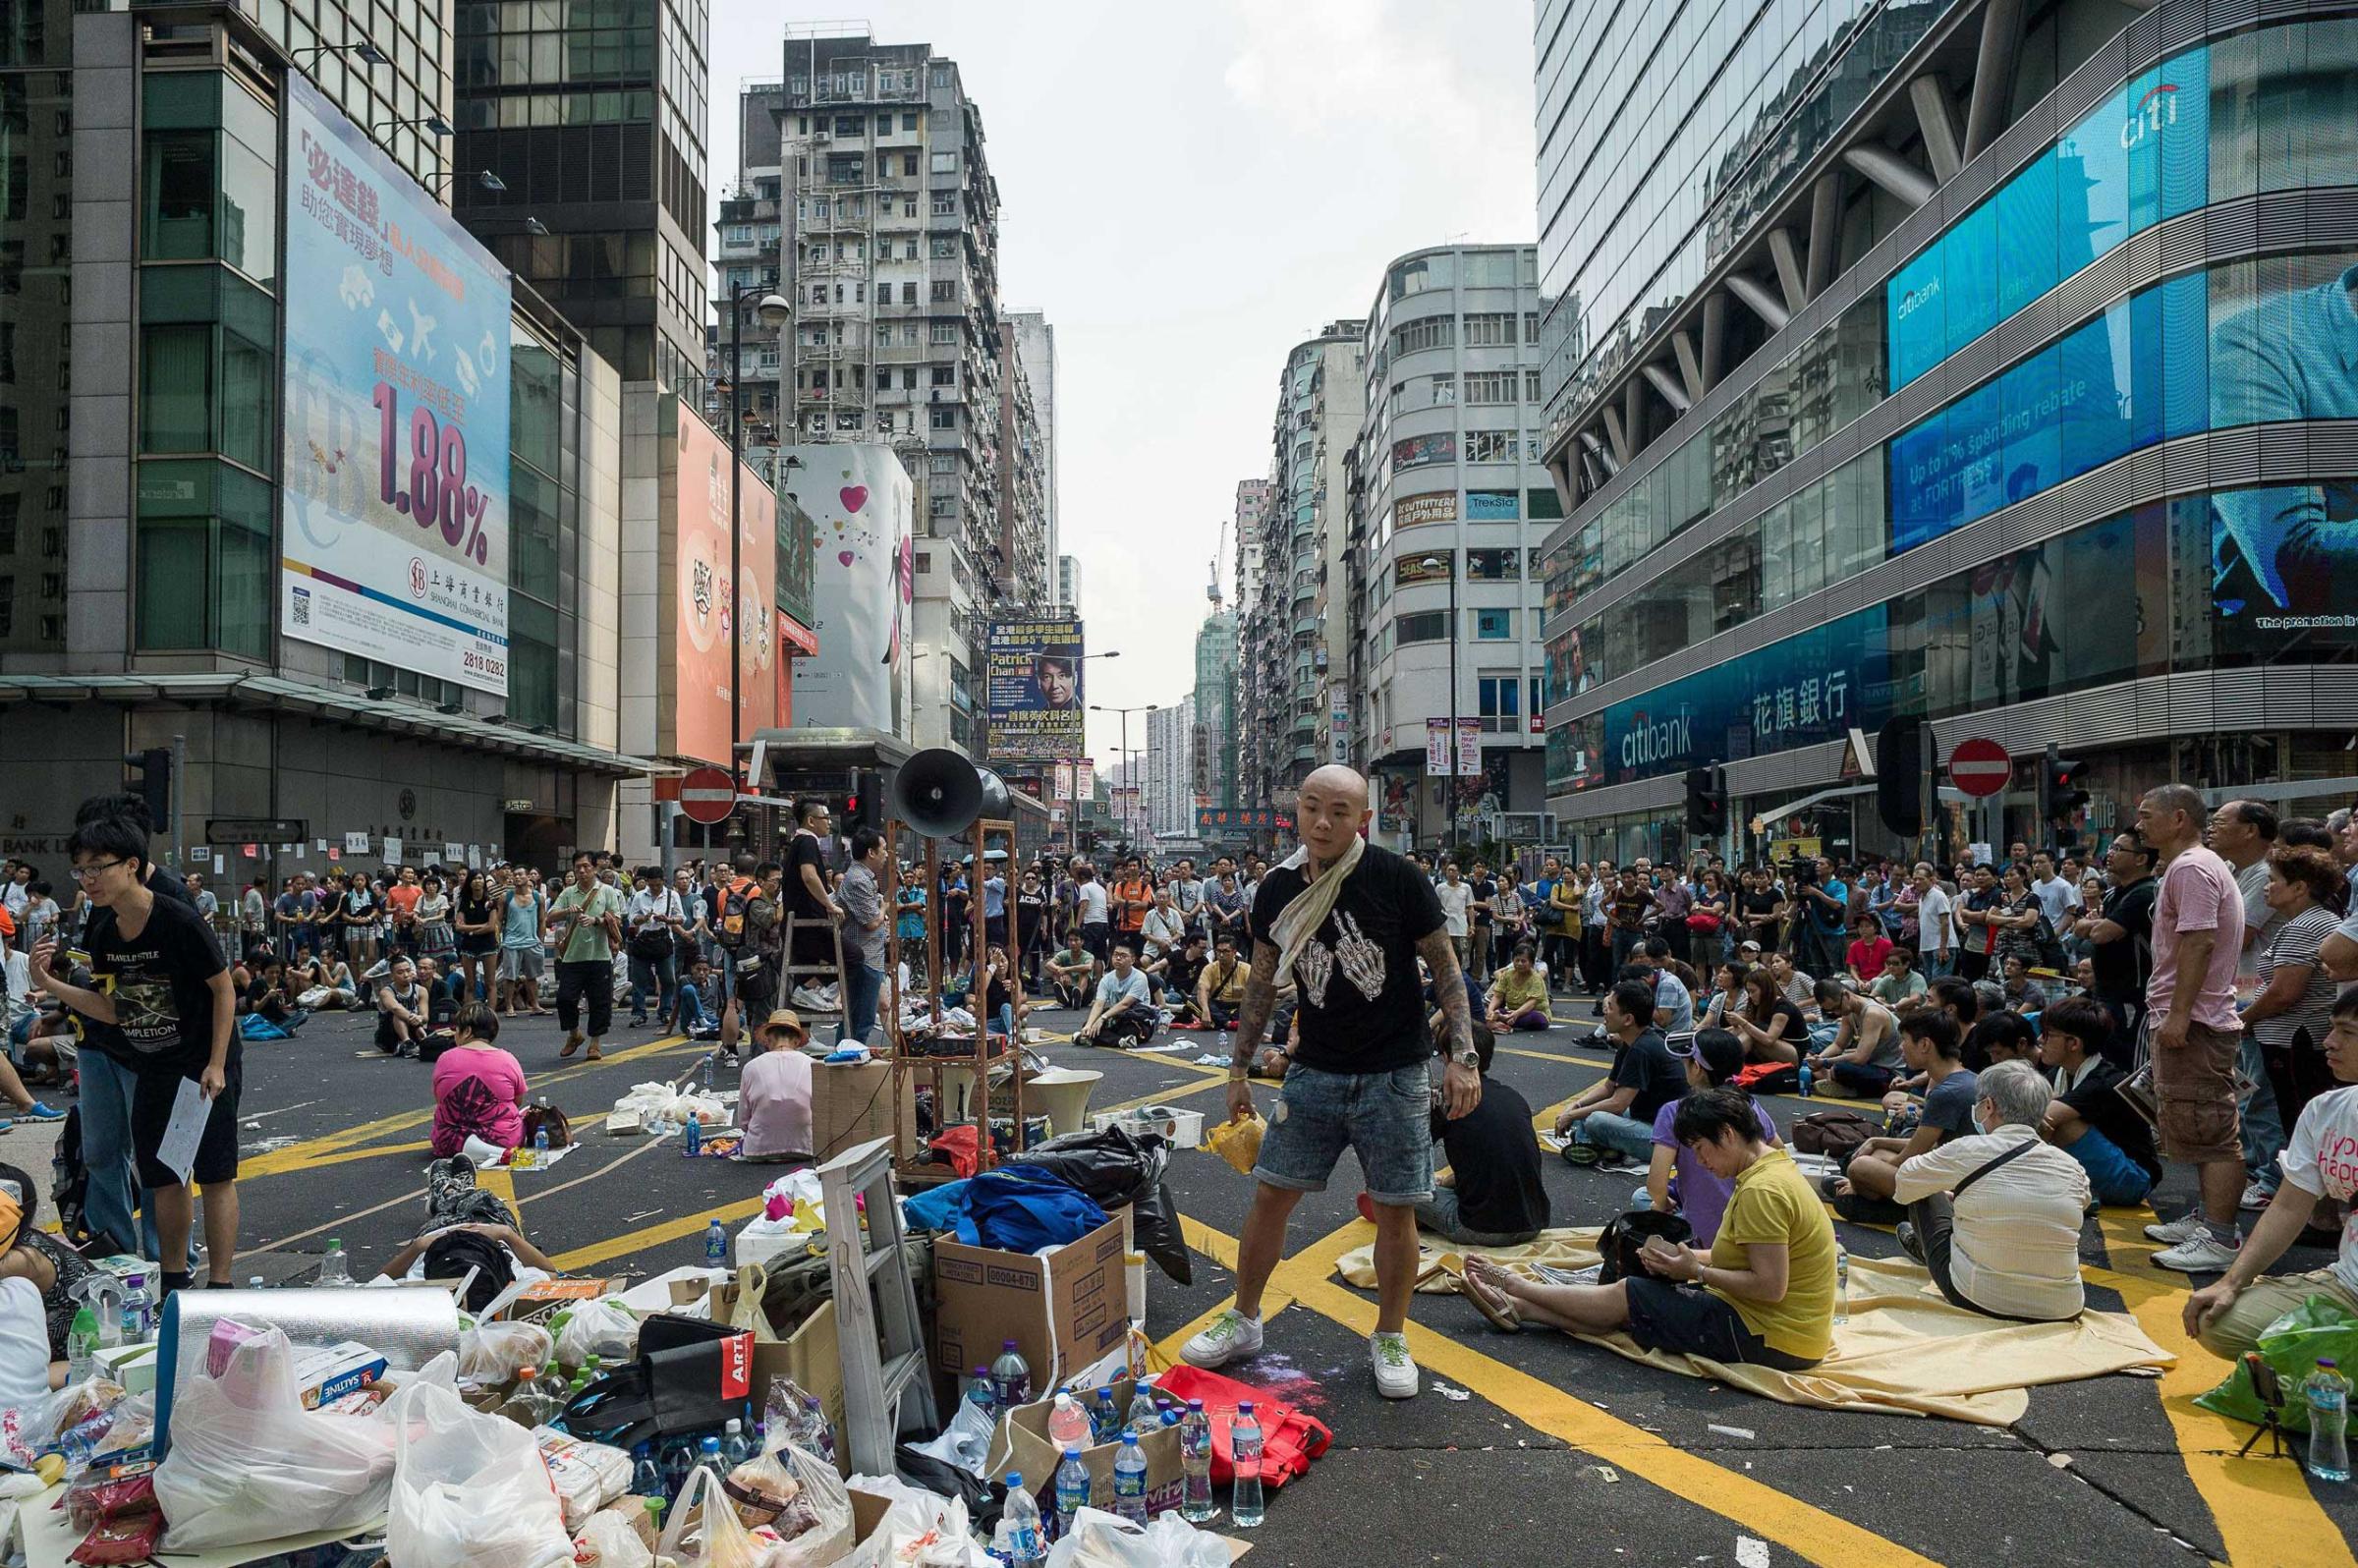 Pro-democracy demonstrators rest during a protest in Hong Kong on Sept. 30, 2014.